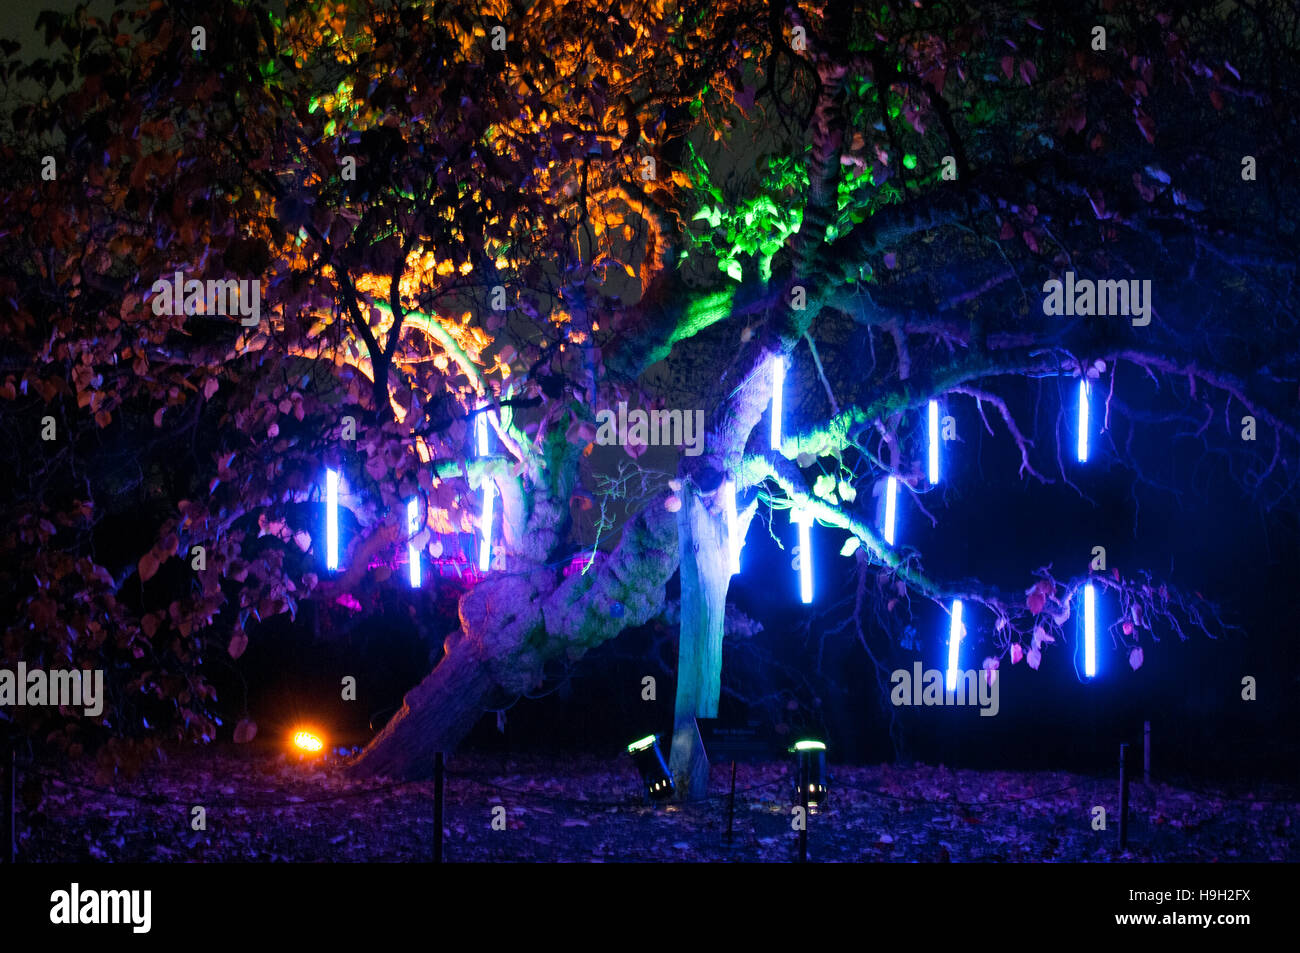 London, UK. 22nd Nov, 2016. A light installation at Kew Gardens. More than 60,000 lights light up the trees, plants and gardens as part of Christmas at Kew.  The trail is more than a mile long and includes artworks from both UK and international artists and designers. The show opens 23rd November 2016 and closes 2nd January 2017. Credit:  Tricia de Courcy Ling/Alamy Live News Stock Photo